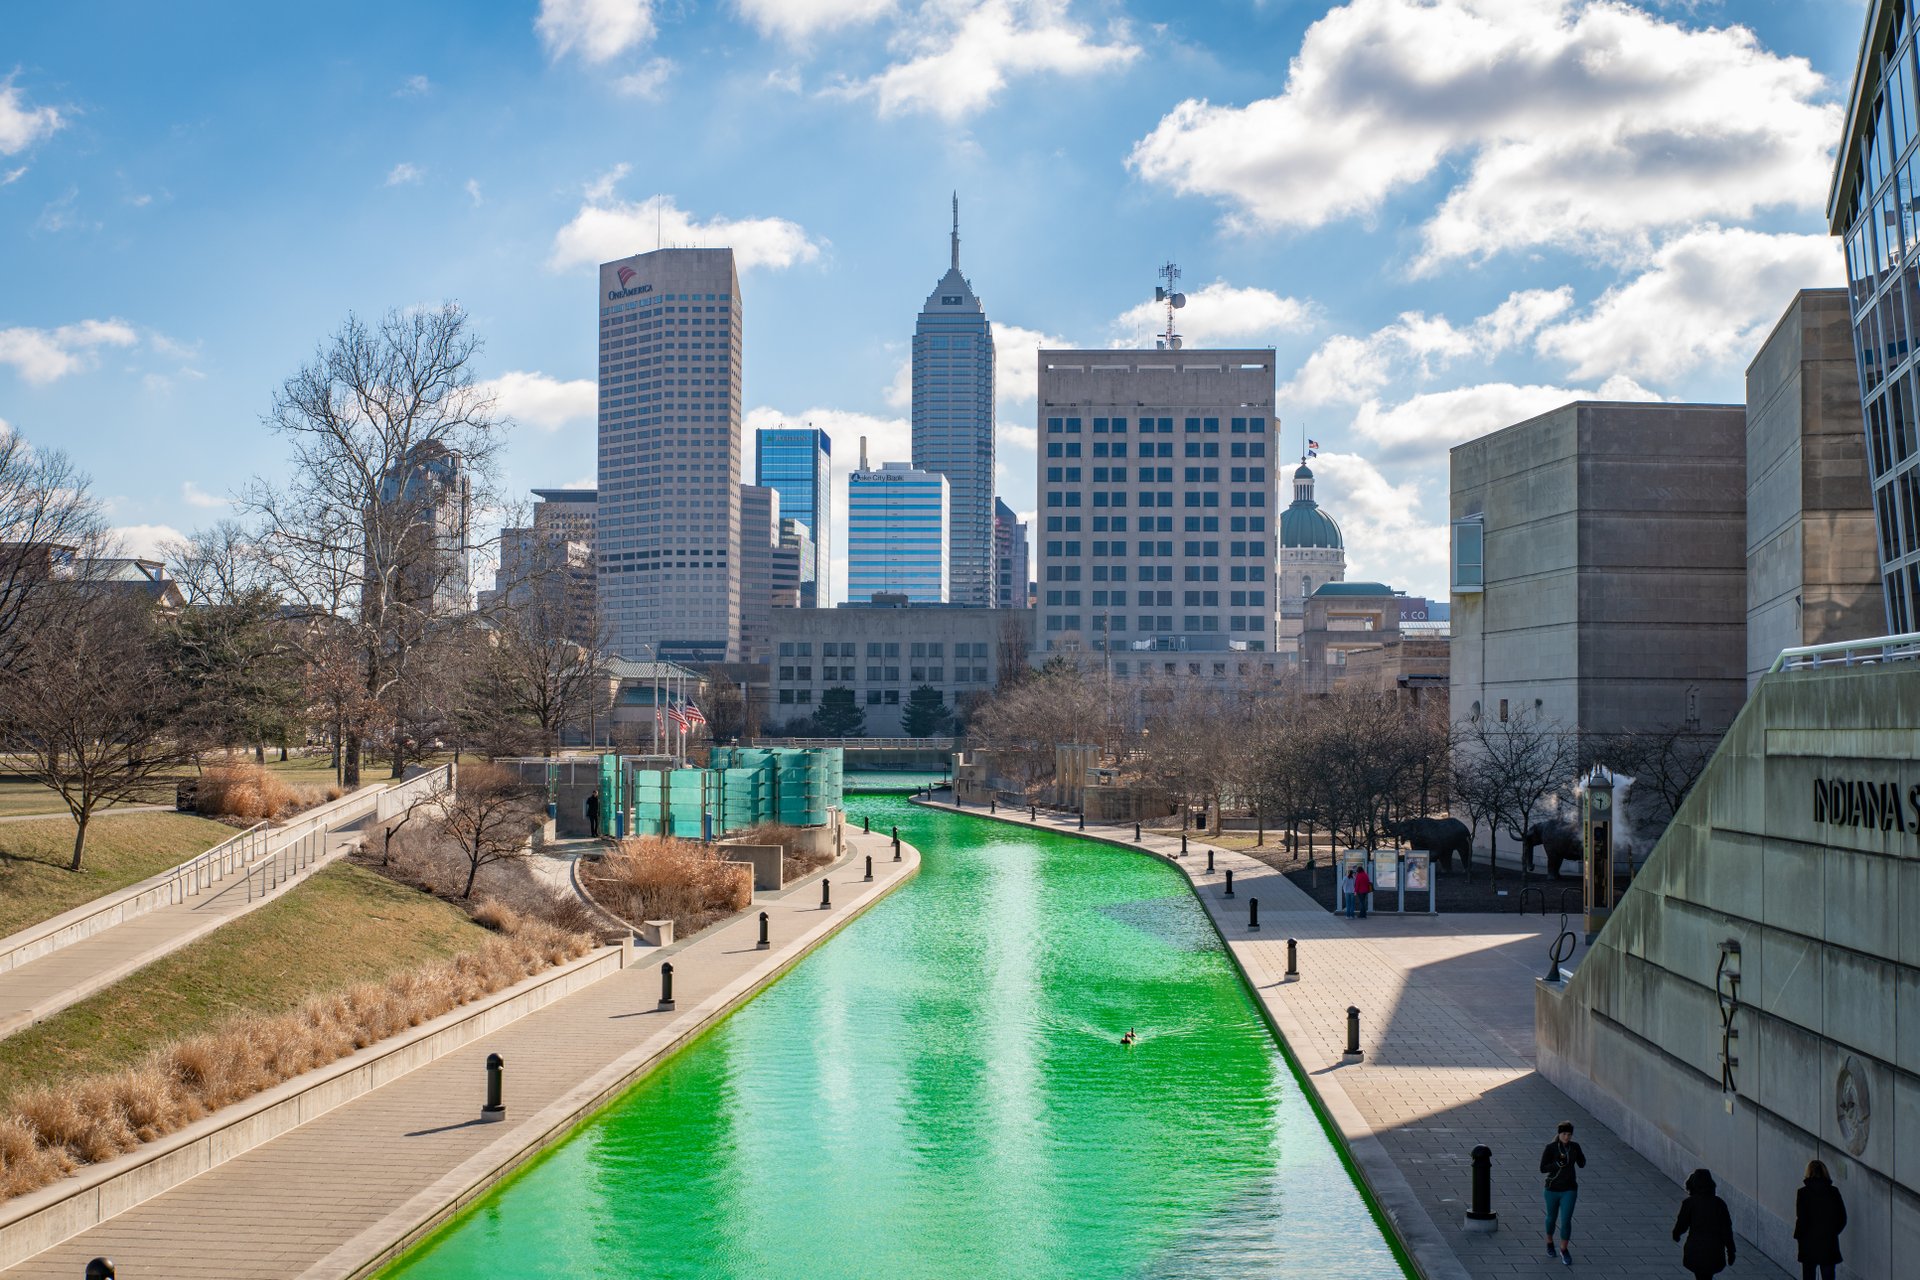 A view of the Canal Walk looking towards the downtown skyline. The water of the canal is bright green.